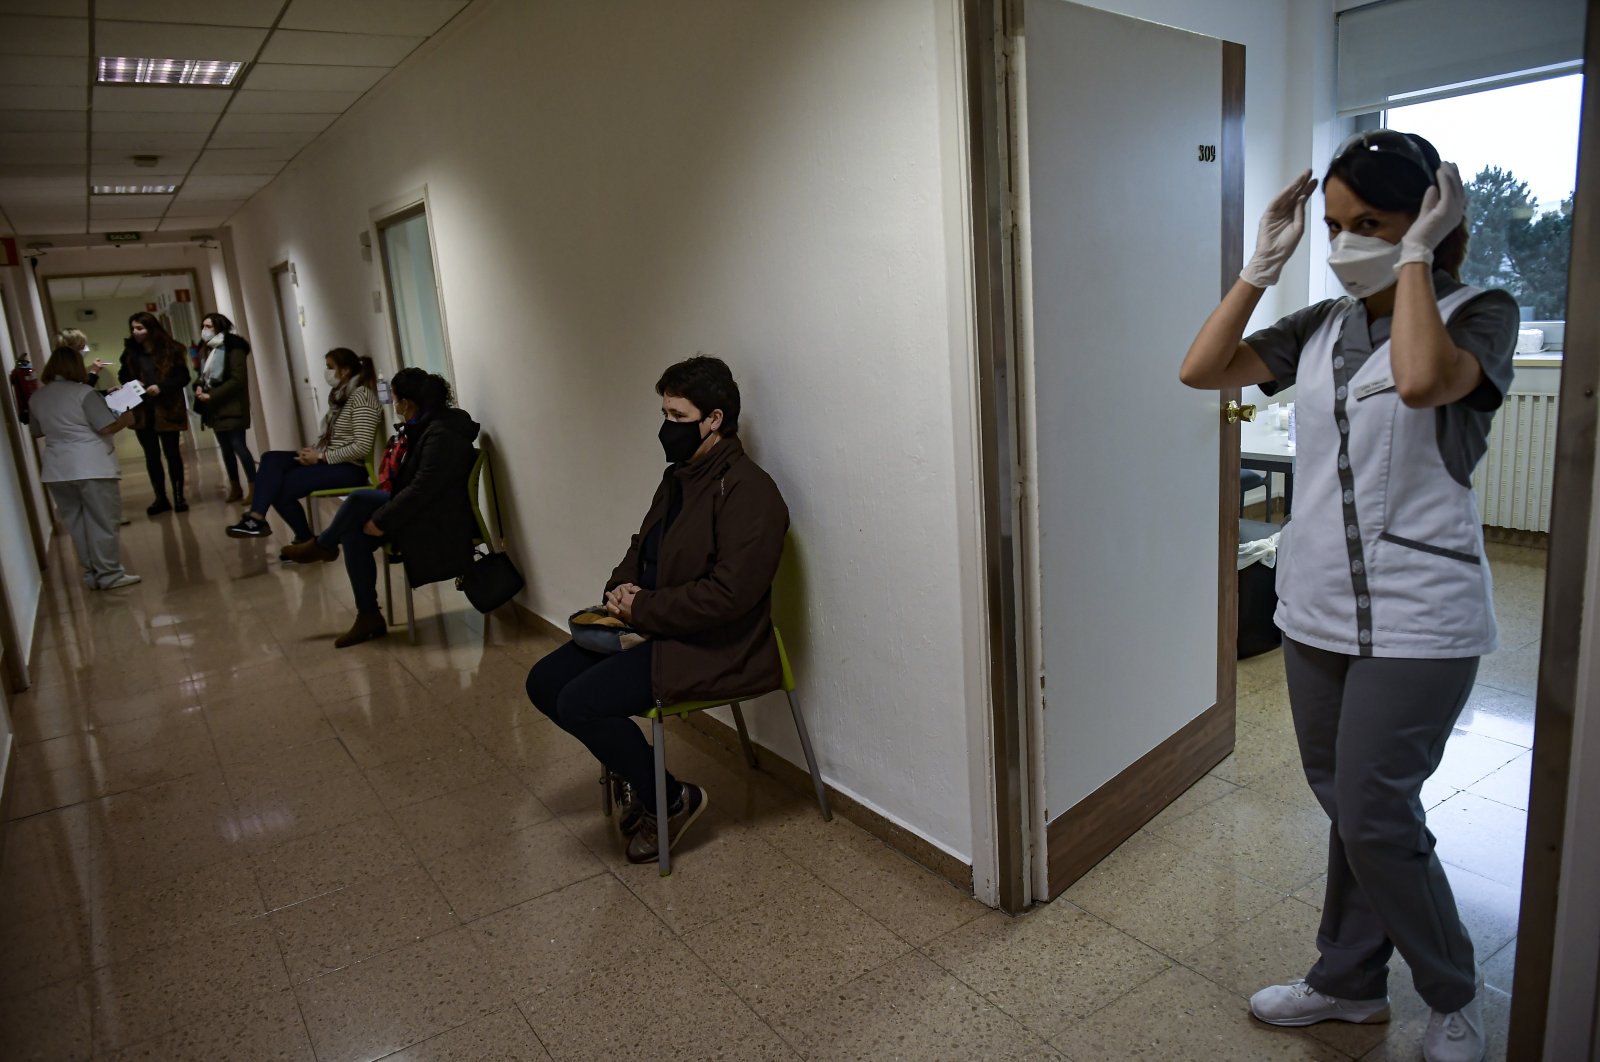 Staff health workers wait to be vaccinated with the Moderna coronavirus vaccine at Clinica Universitaria, in Pamplona, northern Spain, Jan. 20, 2021. (AP Photo)